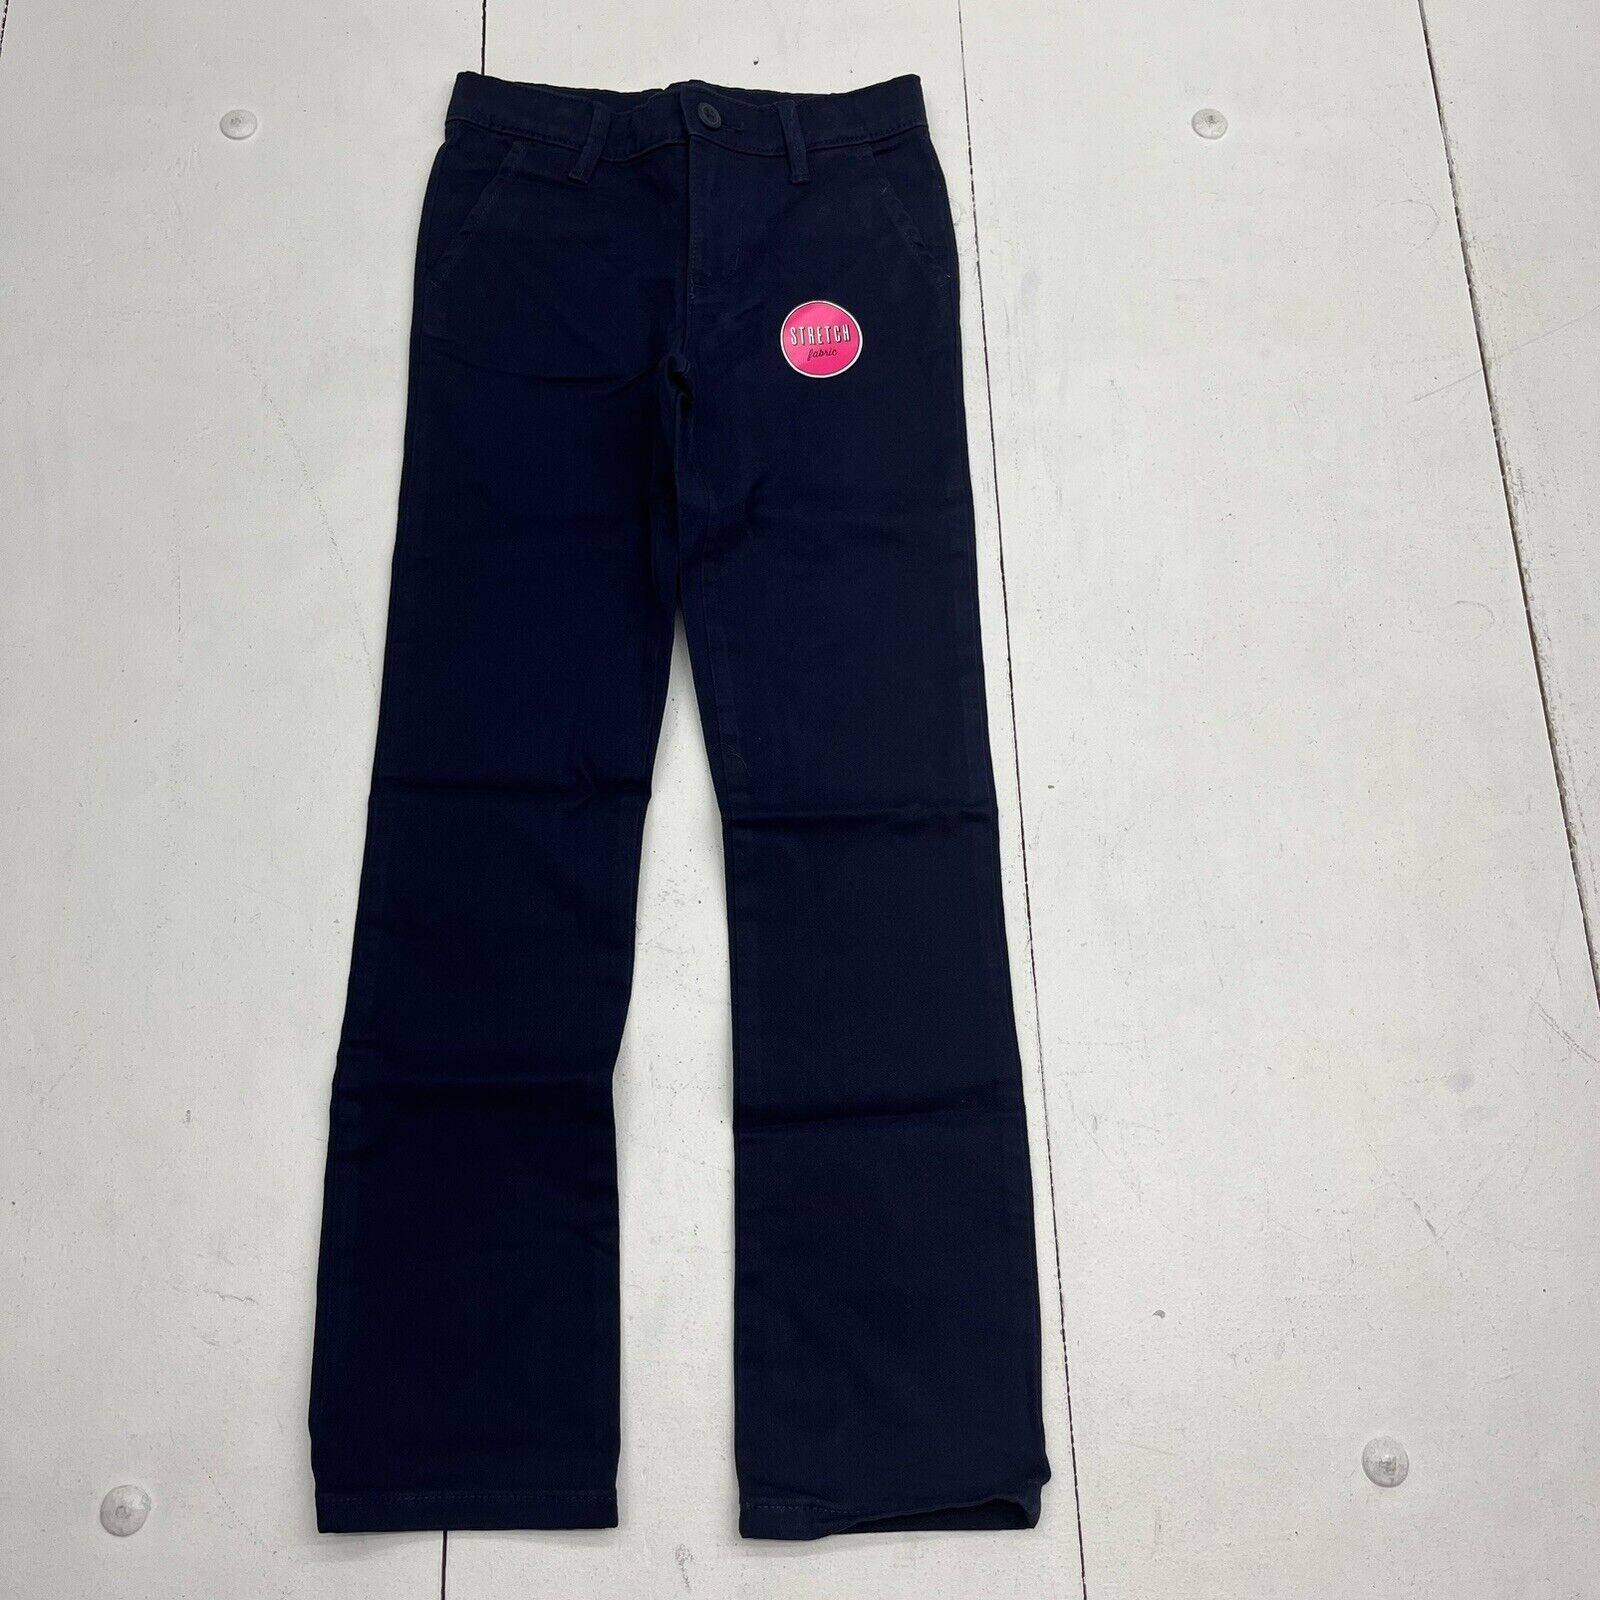 The Children's Place Navy Blue Slim Pants Girls Size 8 NEW - beyond exchange